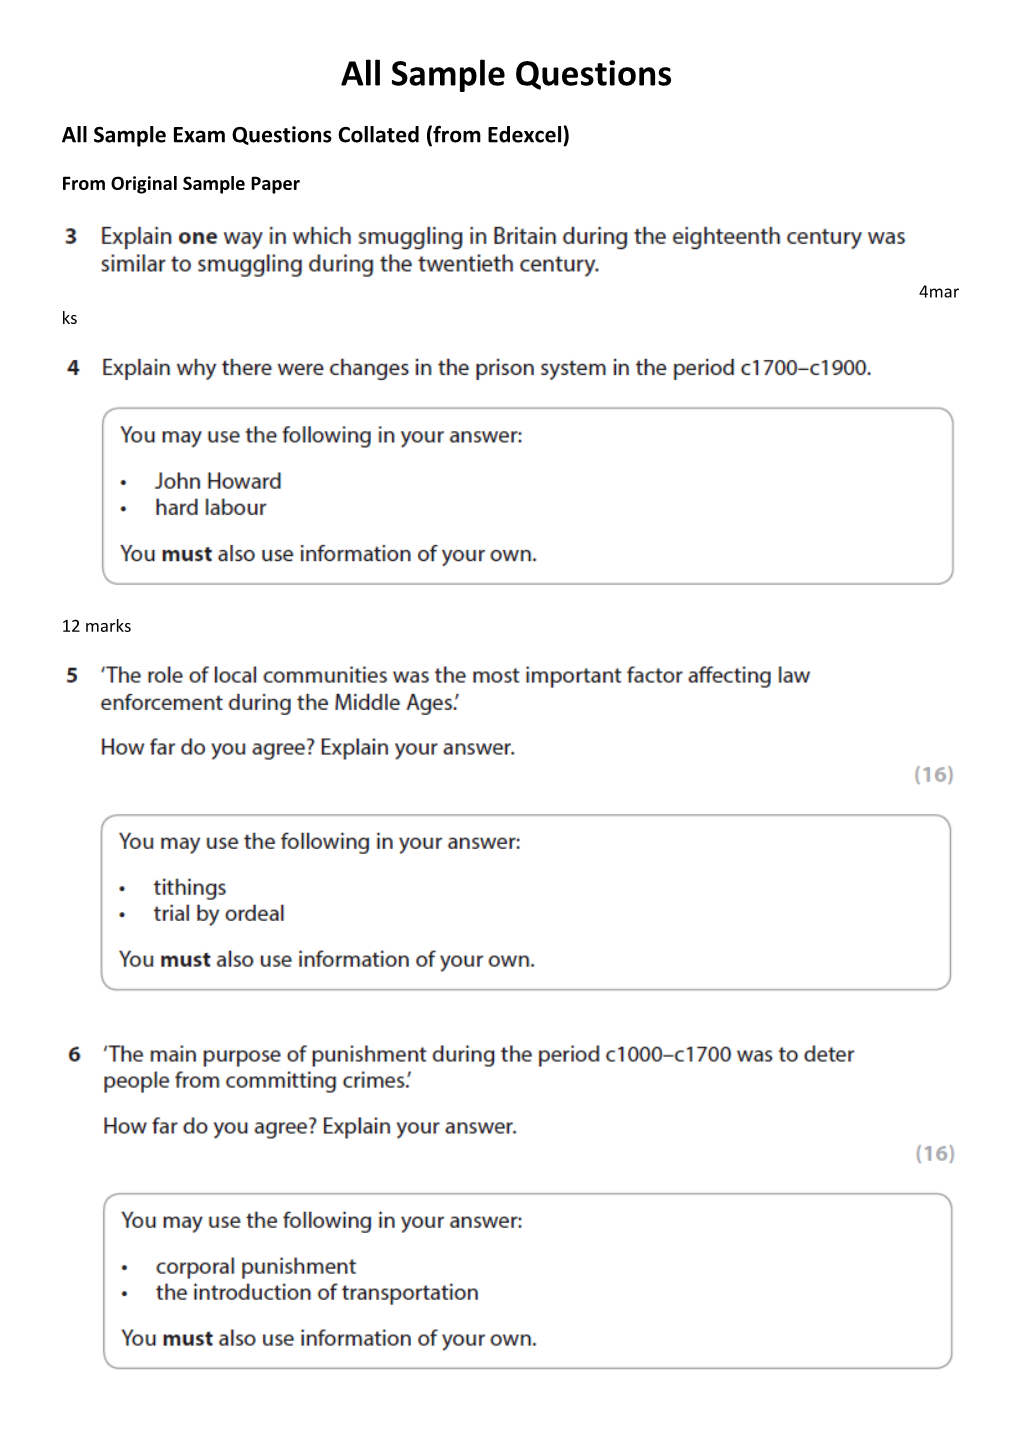 All Sample Exam Questions Collated (From Edexcel)